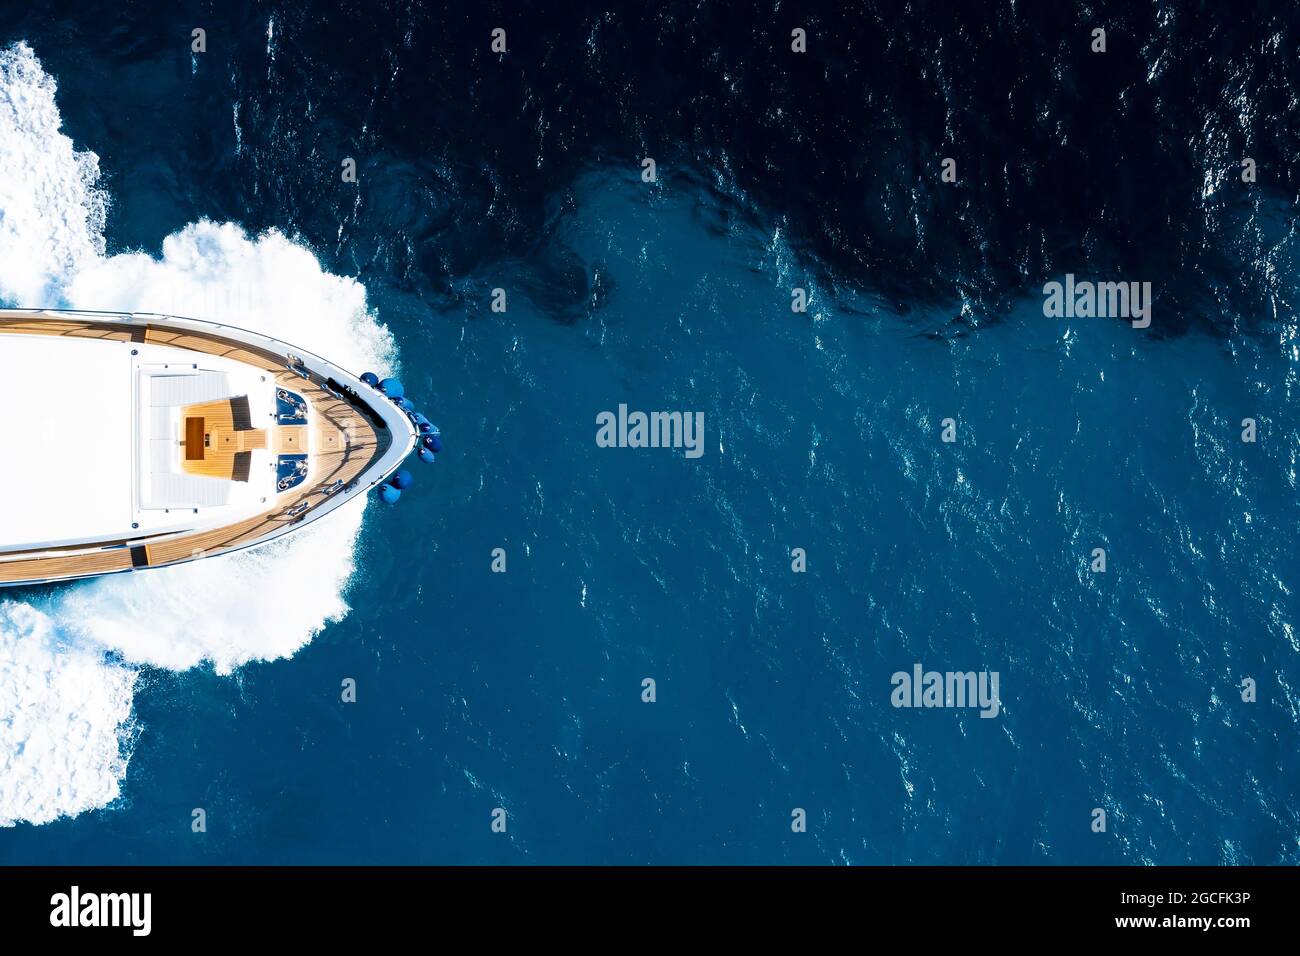 View from above, stunning aerial view of a deck of a luxury yacht cruising on a blue water creating a wake. Costa Smeralda, Sardinia, Italy. Stock Photo